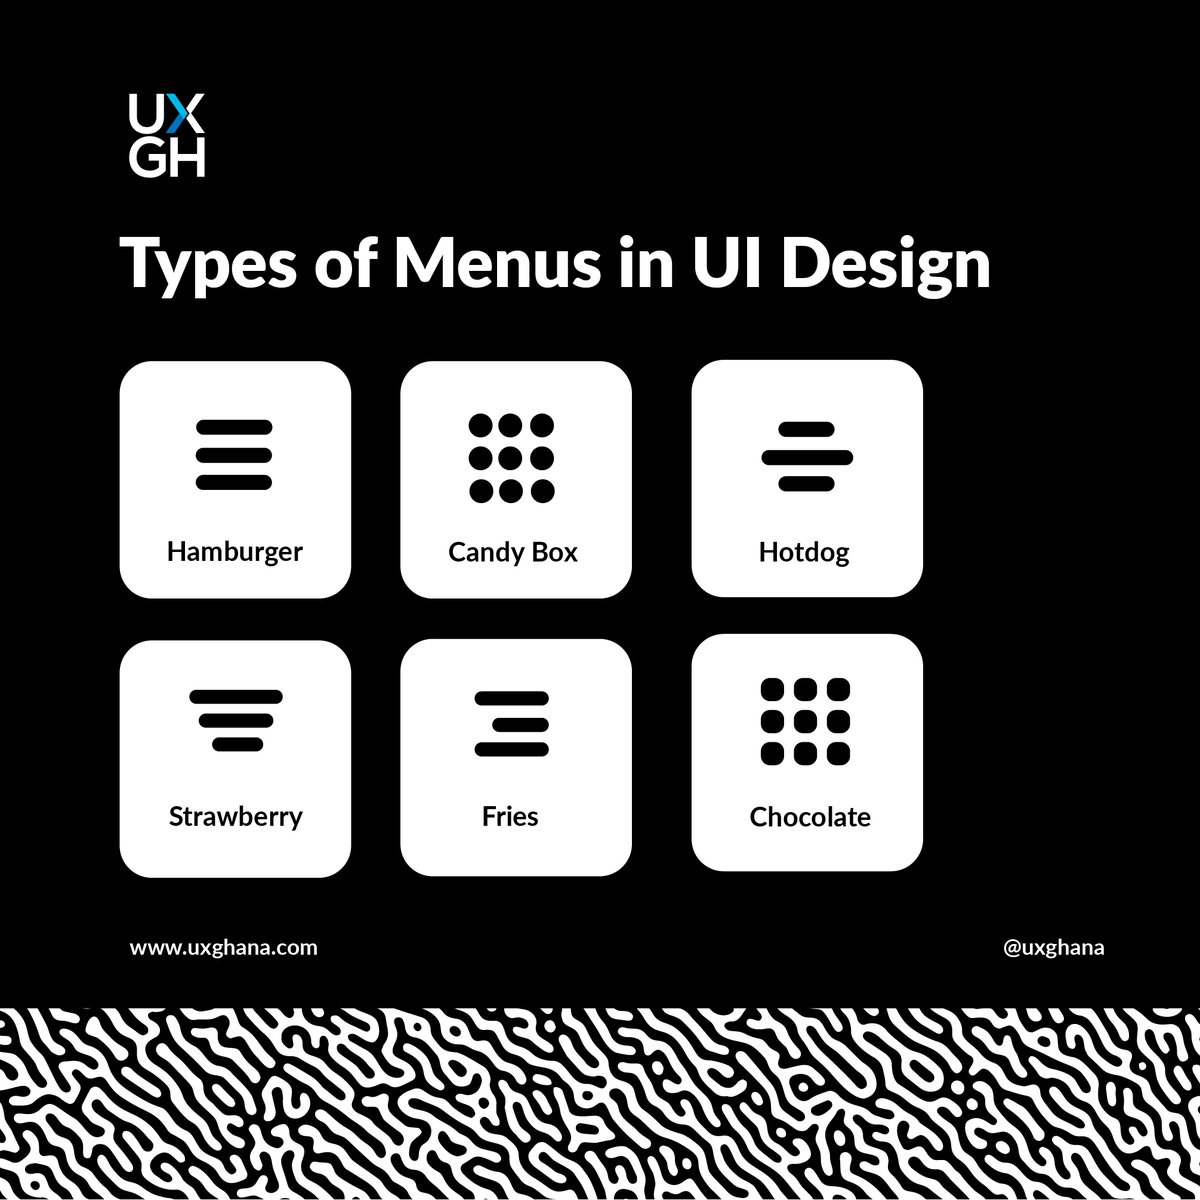 The correct names for the UI menu for the previous post is.... Thanks to everyone who participated! #uxmenus #CreativeChallenge #UXGhana